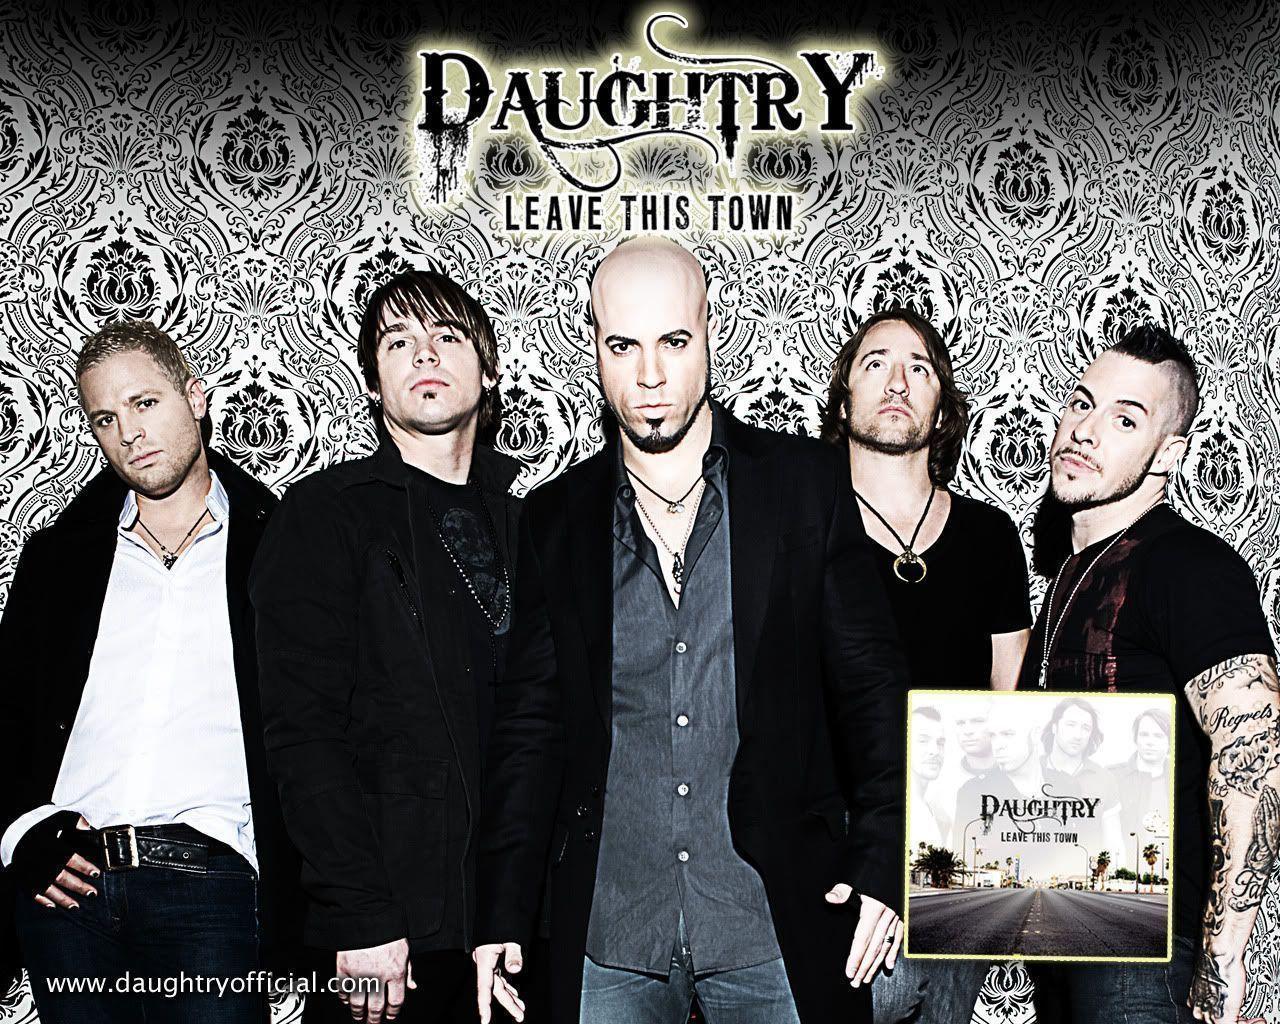 Gallery For > Daughtry Leave This Town Wallpaper